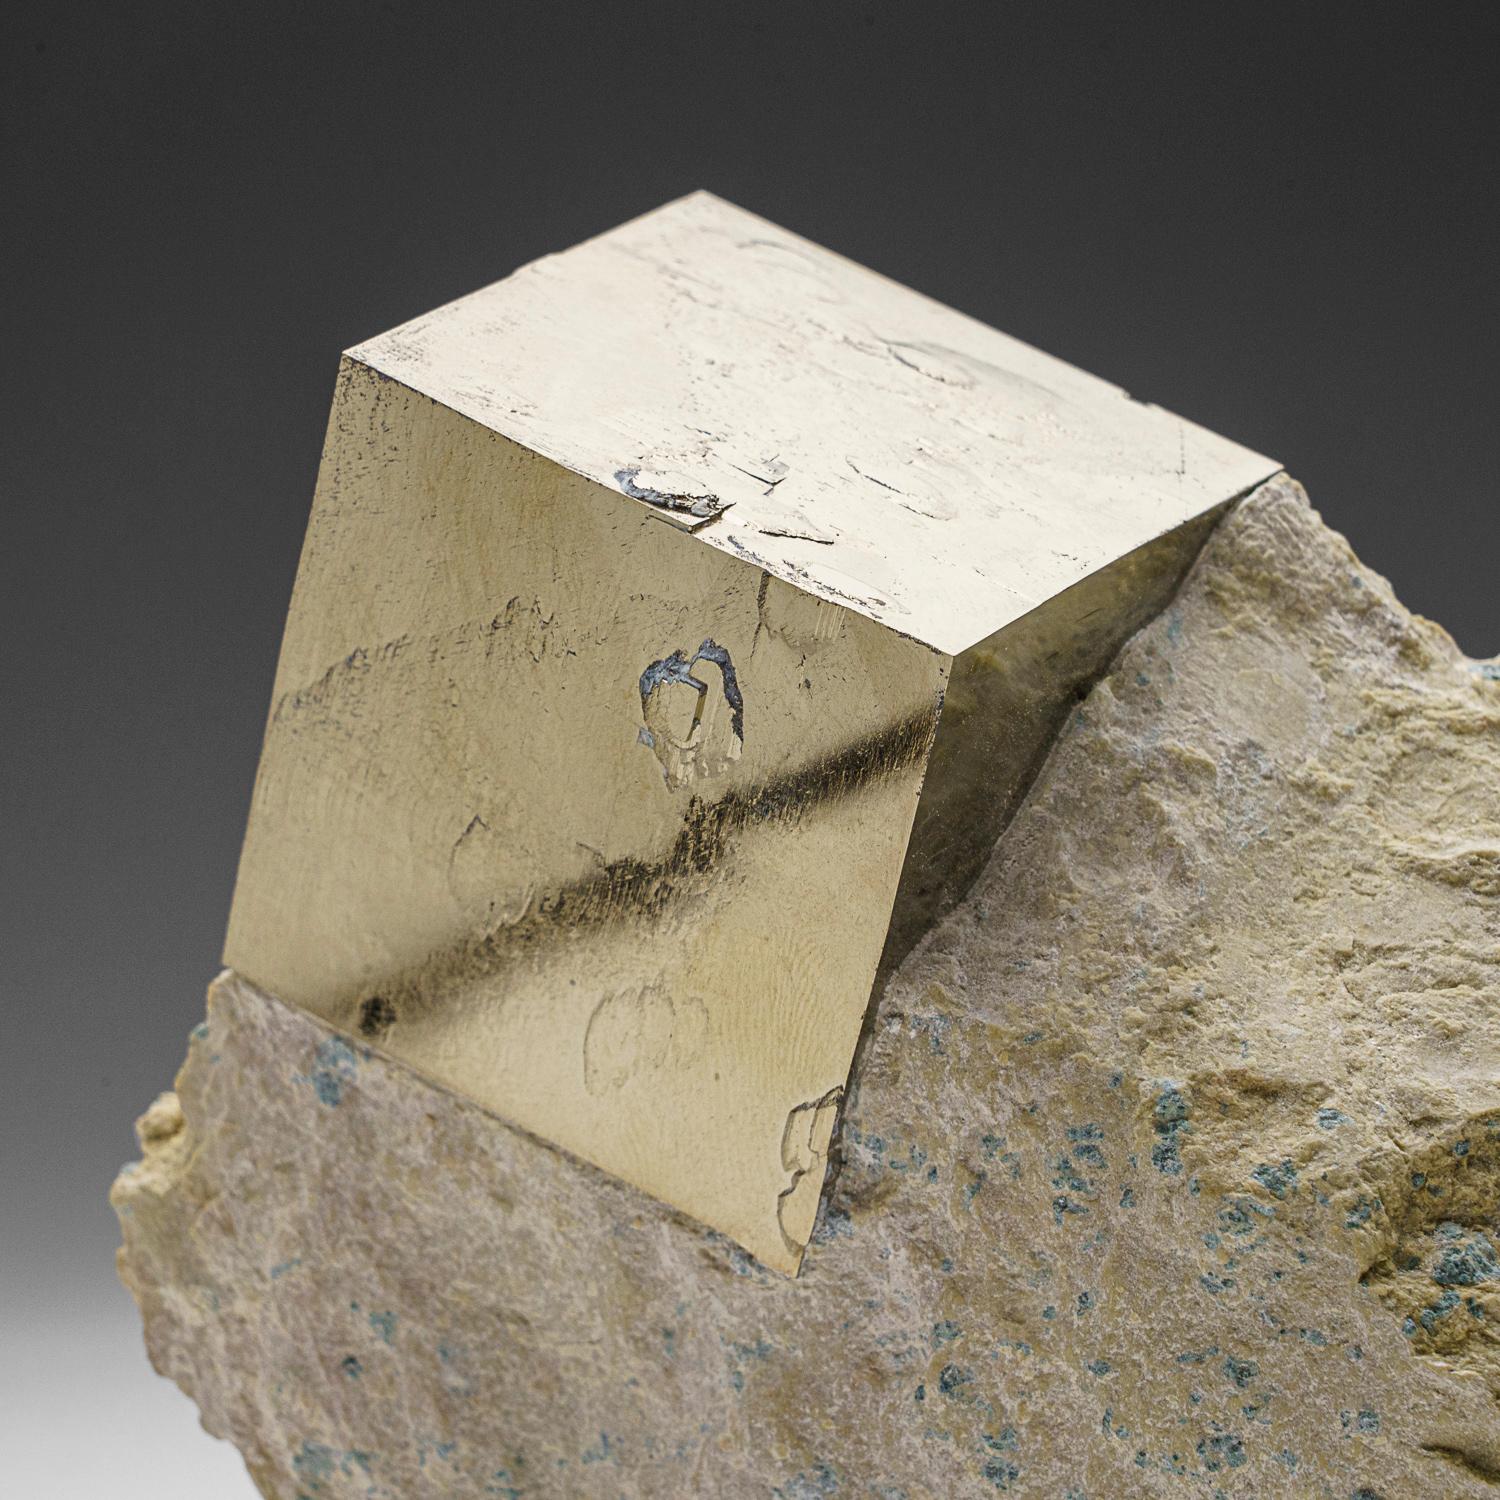 A large sharp cubic metallic pyrite crystal in tan-colored Basalt matrix. The pyrite crystal has smooth crystal faces with almost mirror-like luster, stands upright nicely without additional support. A must-have for any collection, these unique